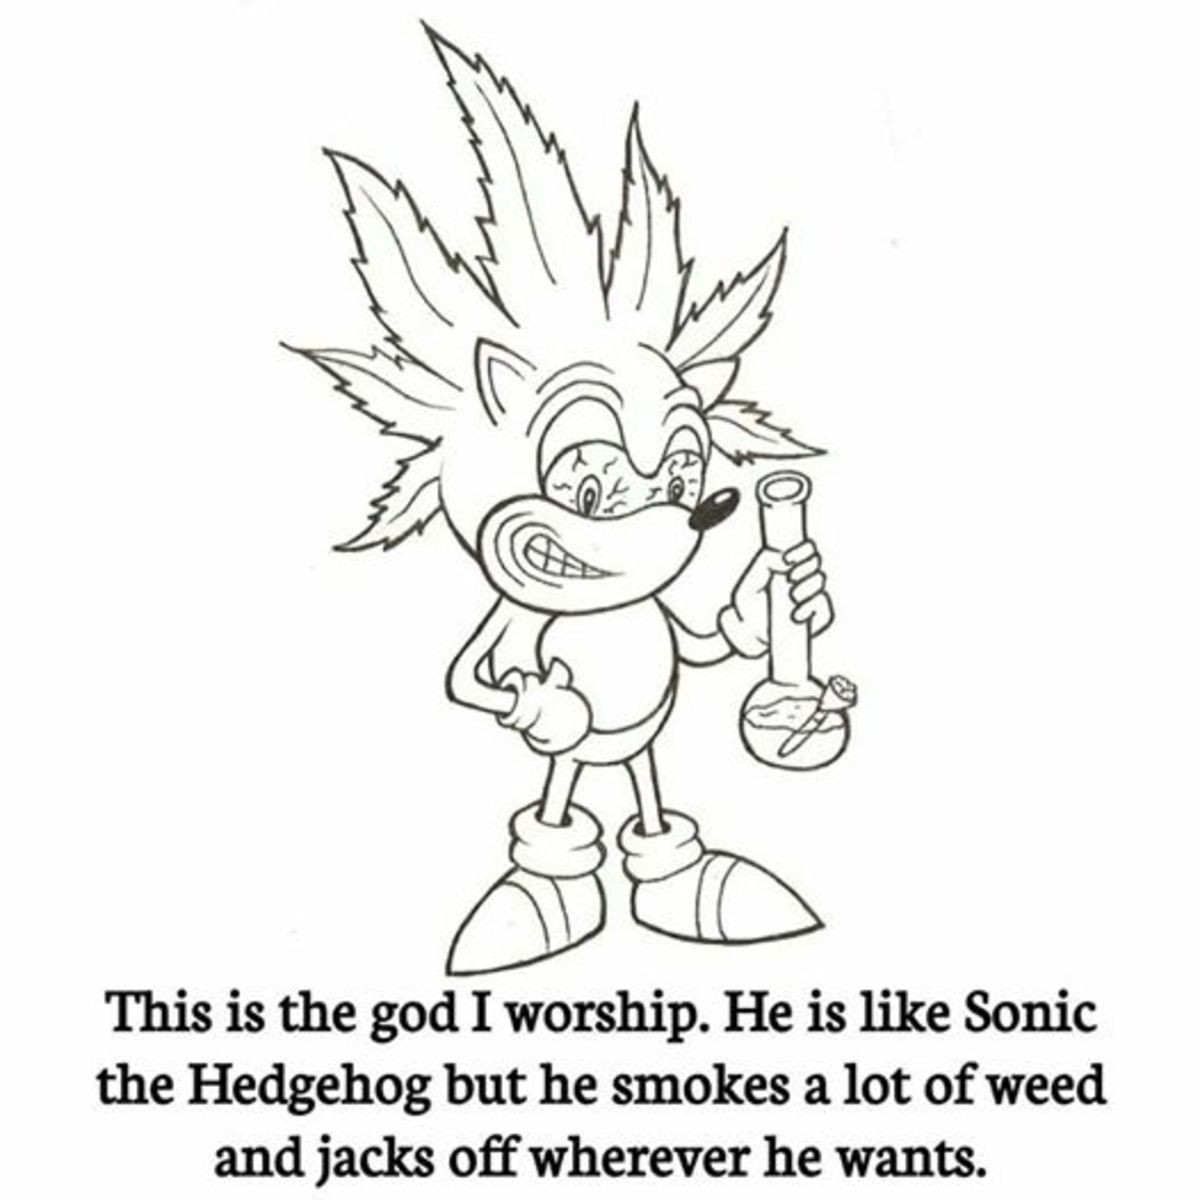 Sanic. . This is the god I worship. He is like Sonic the Hedgehog but he smokes a lot of we ed and jacks off wherever he wants.. Is that Chronic the Hedgehog?